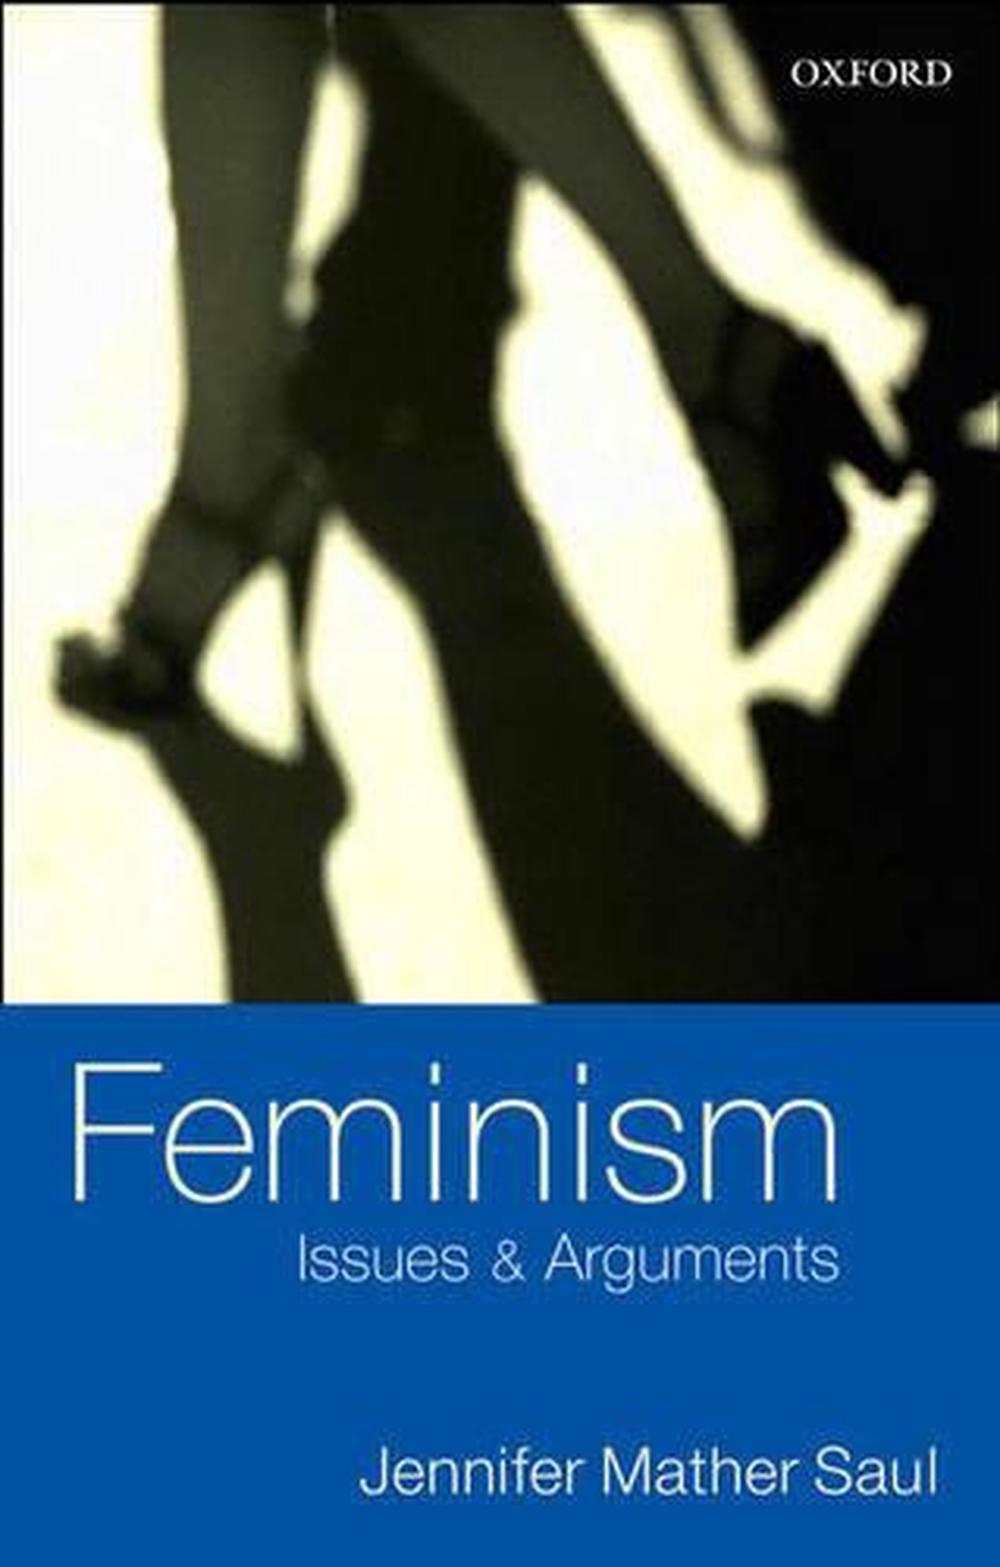 saul feminism issues and arguments pdf file